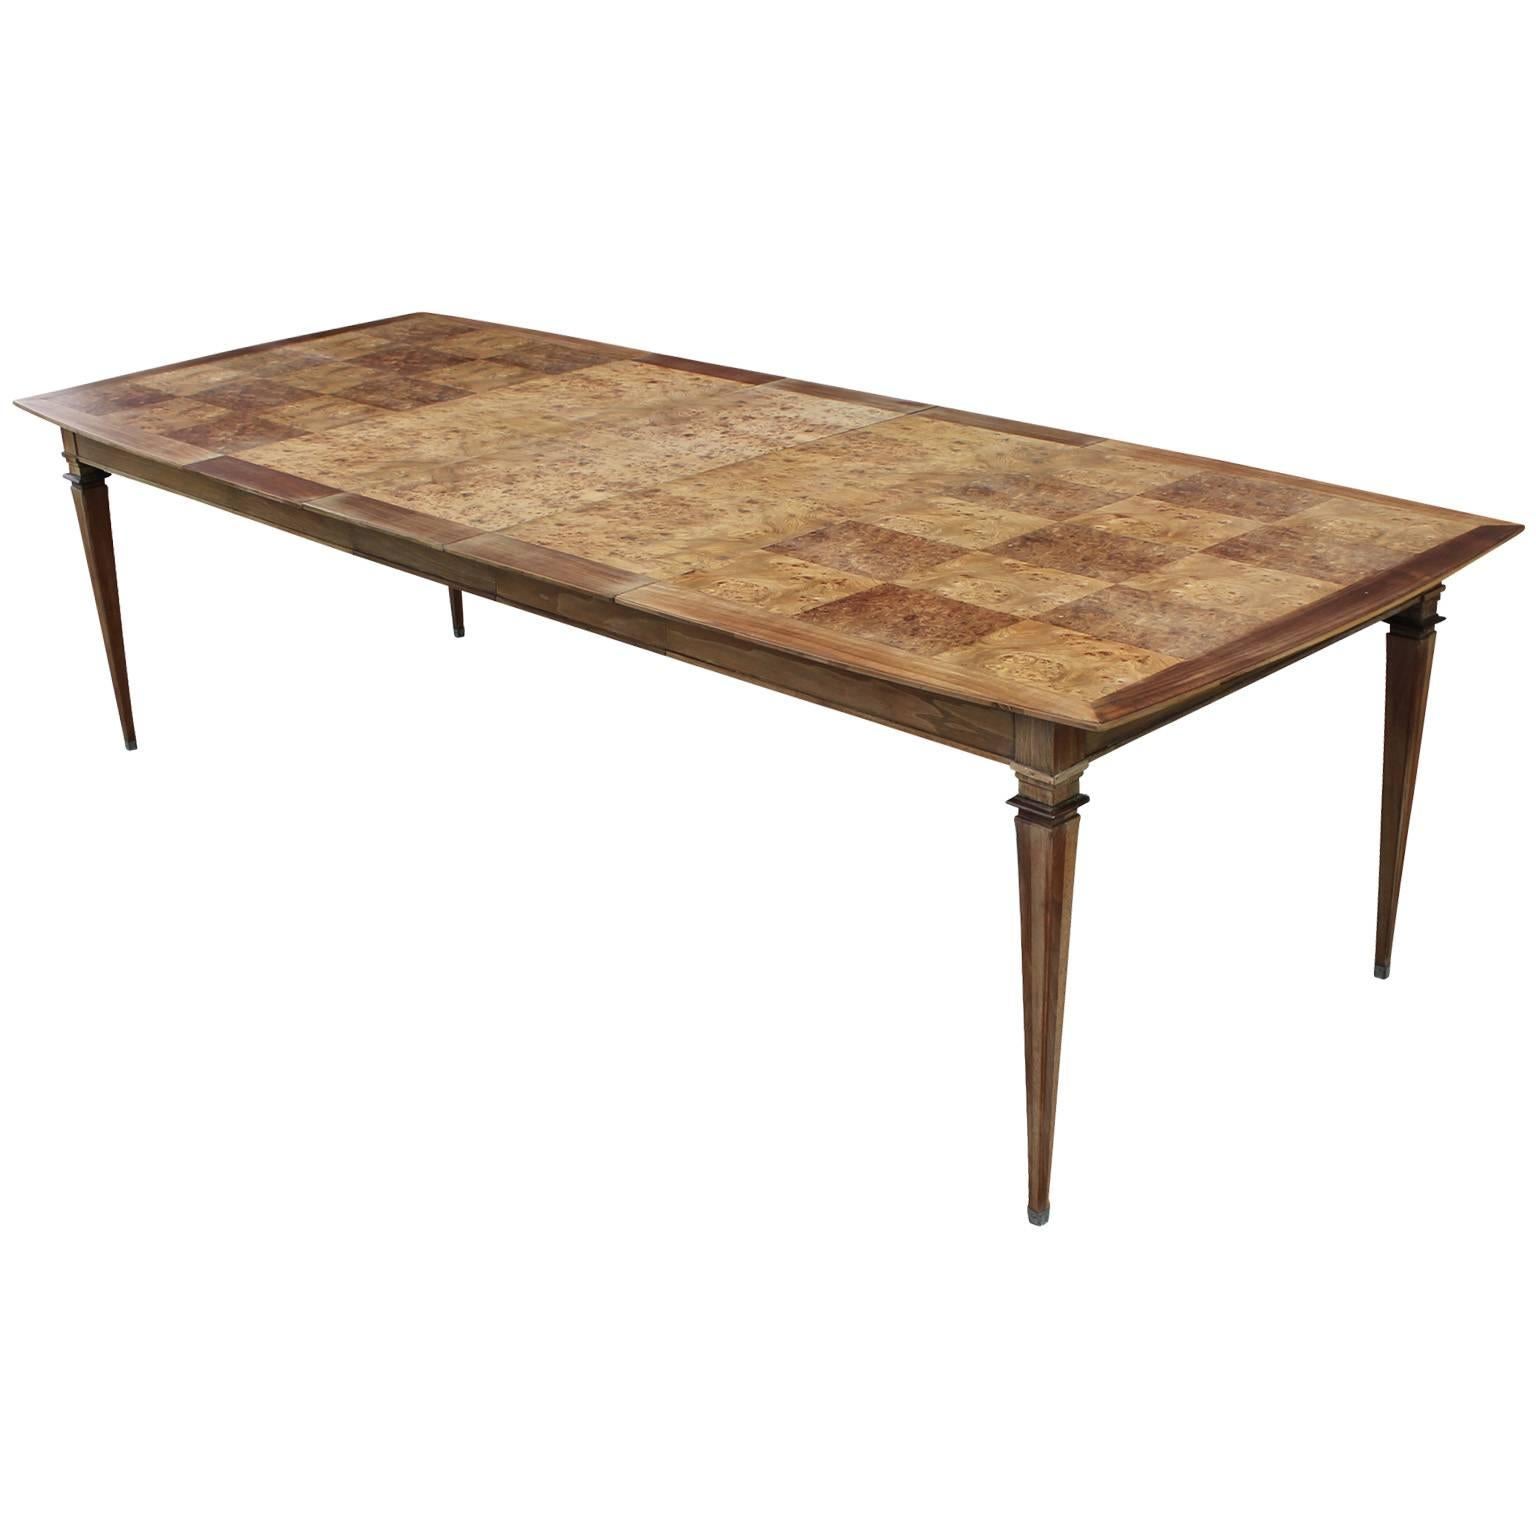 Stunning dining table designed by Bernhard Rohne for Mastercraft. Elegant burled walnut and copper dining table. Tabletop has a slight boat shape and features checkered burl parquetry. Leaves have matchbook burl veneer. Dramatically tapered legs are